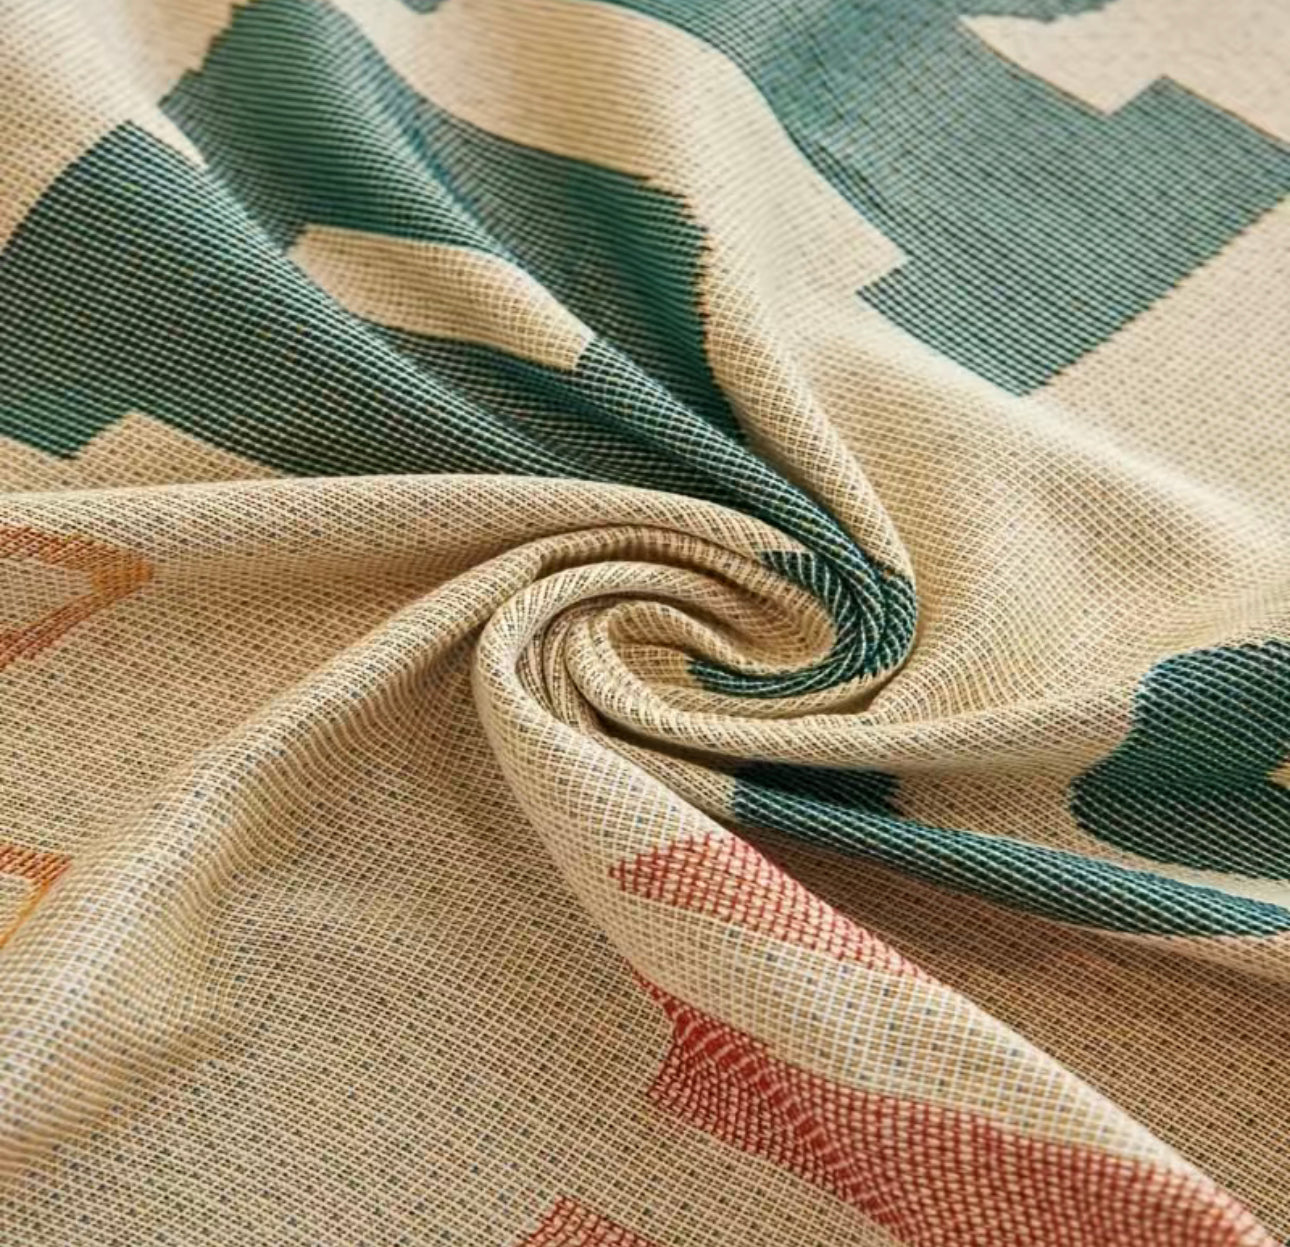 Tropical woven blanket with muted colors 71x118 inches